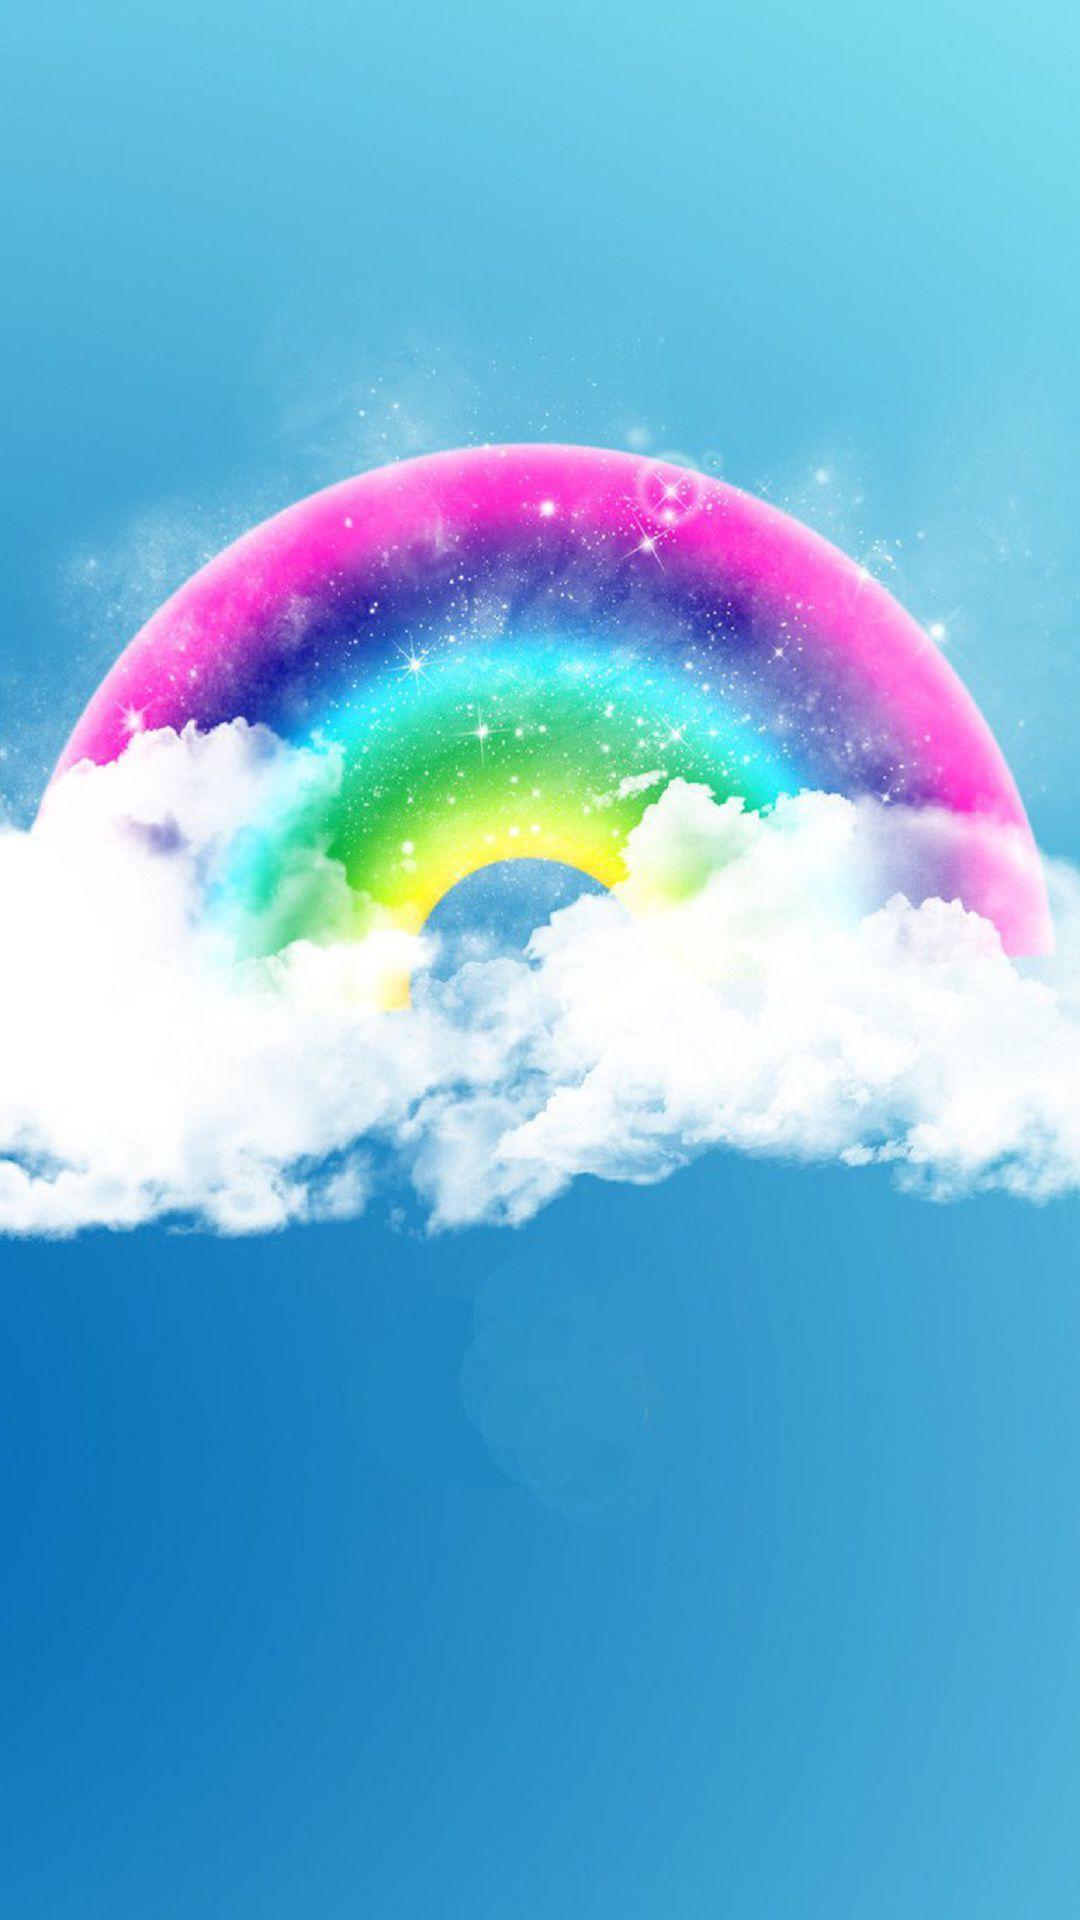 Tải xuống miễn phí 1080x1920 Fantasy Rainbow Fluffy Clouds Android Wallpaper